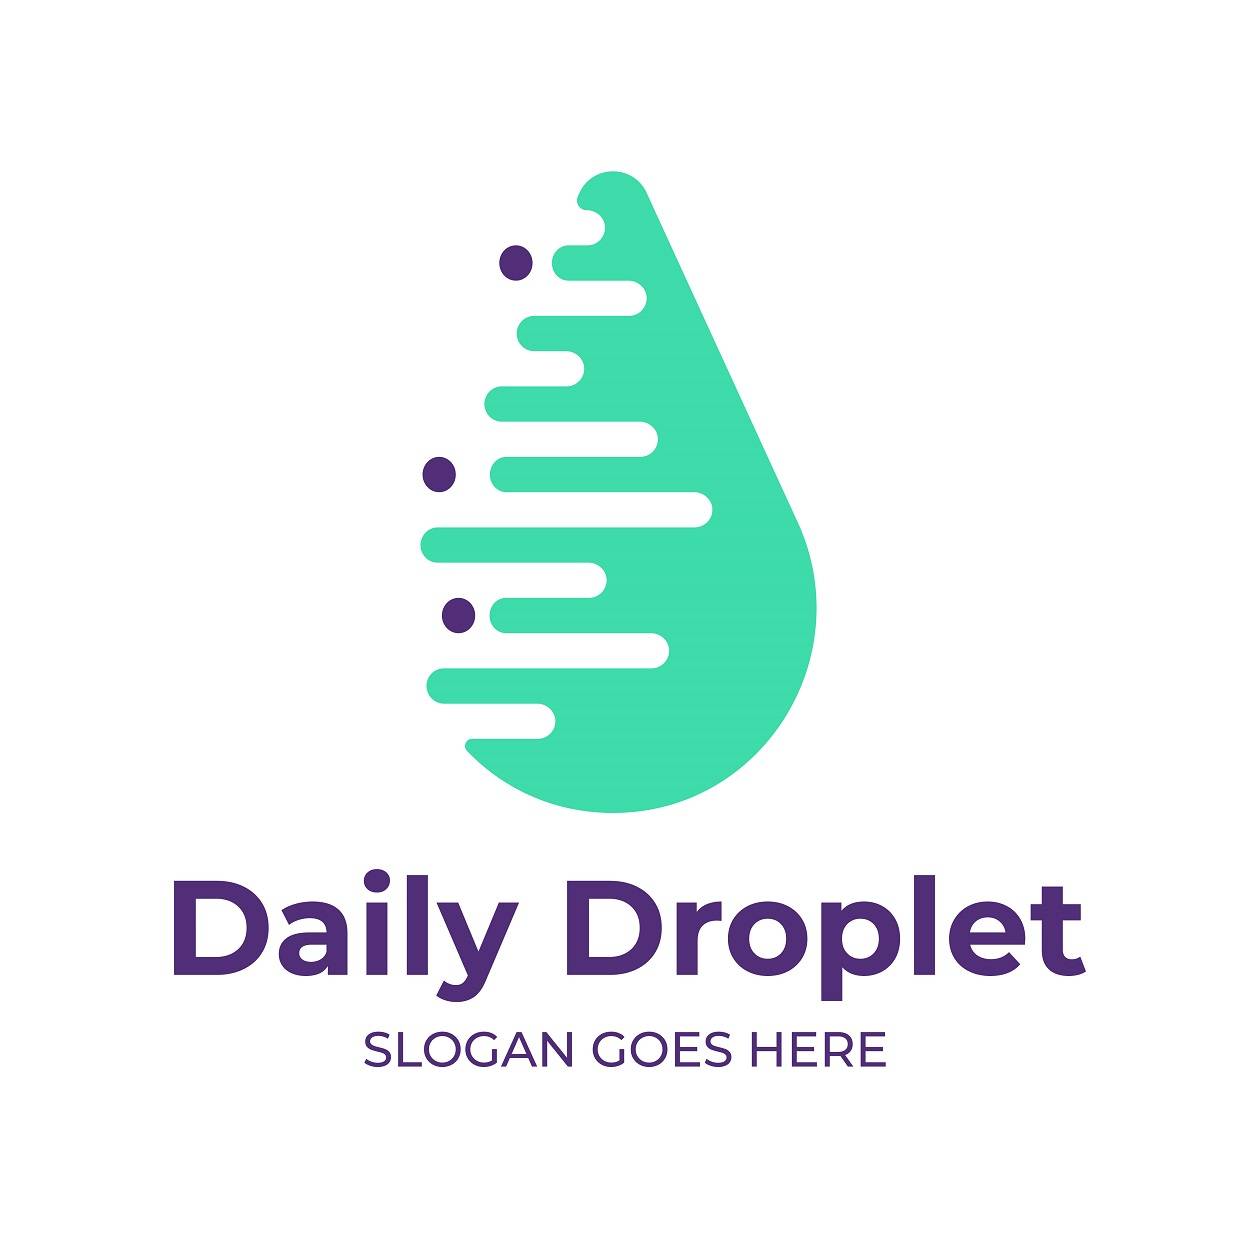 Daily droplet innovative logo design in green and navy blue color